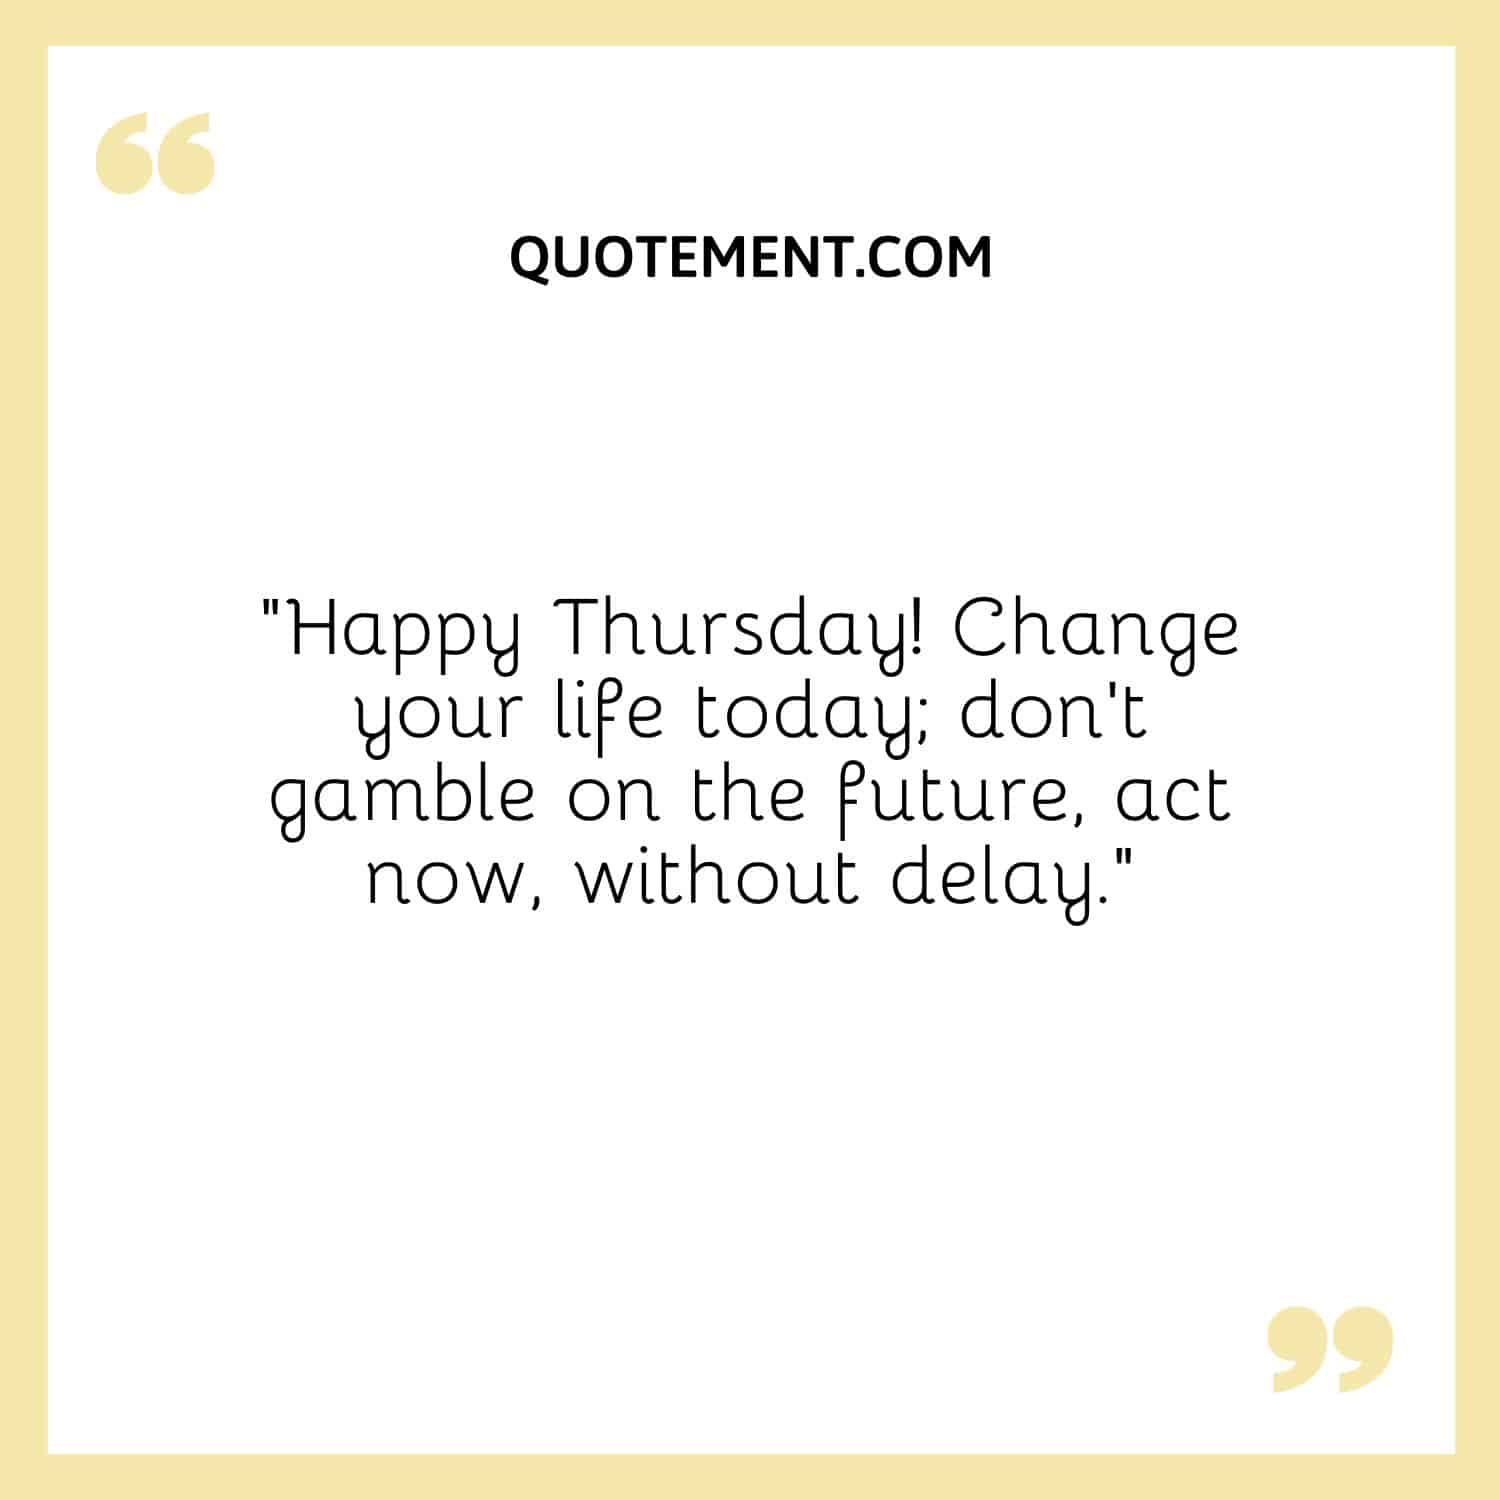 “Happy Thursday! Change your life today; don’t gamble on the future, act now, without delay.”